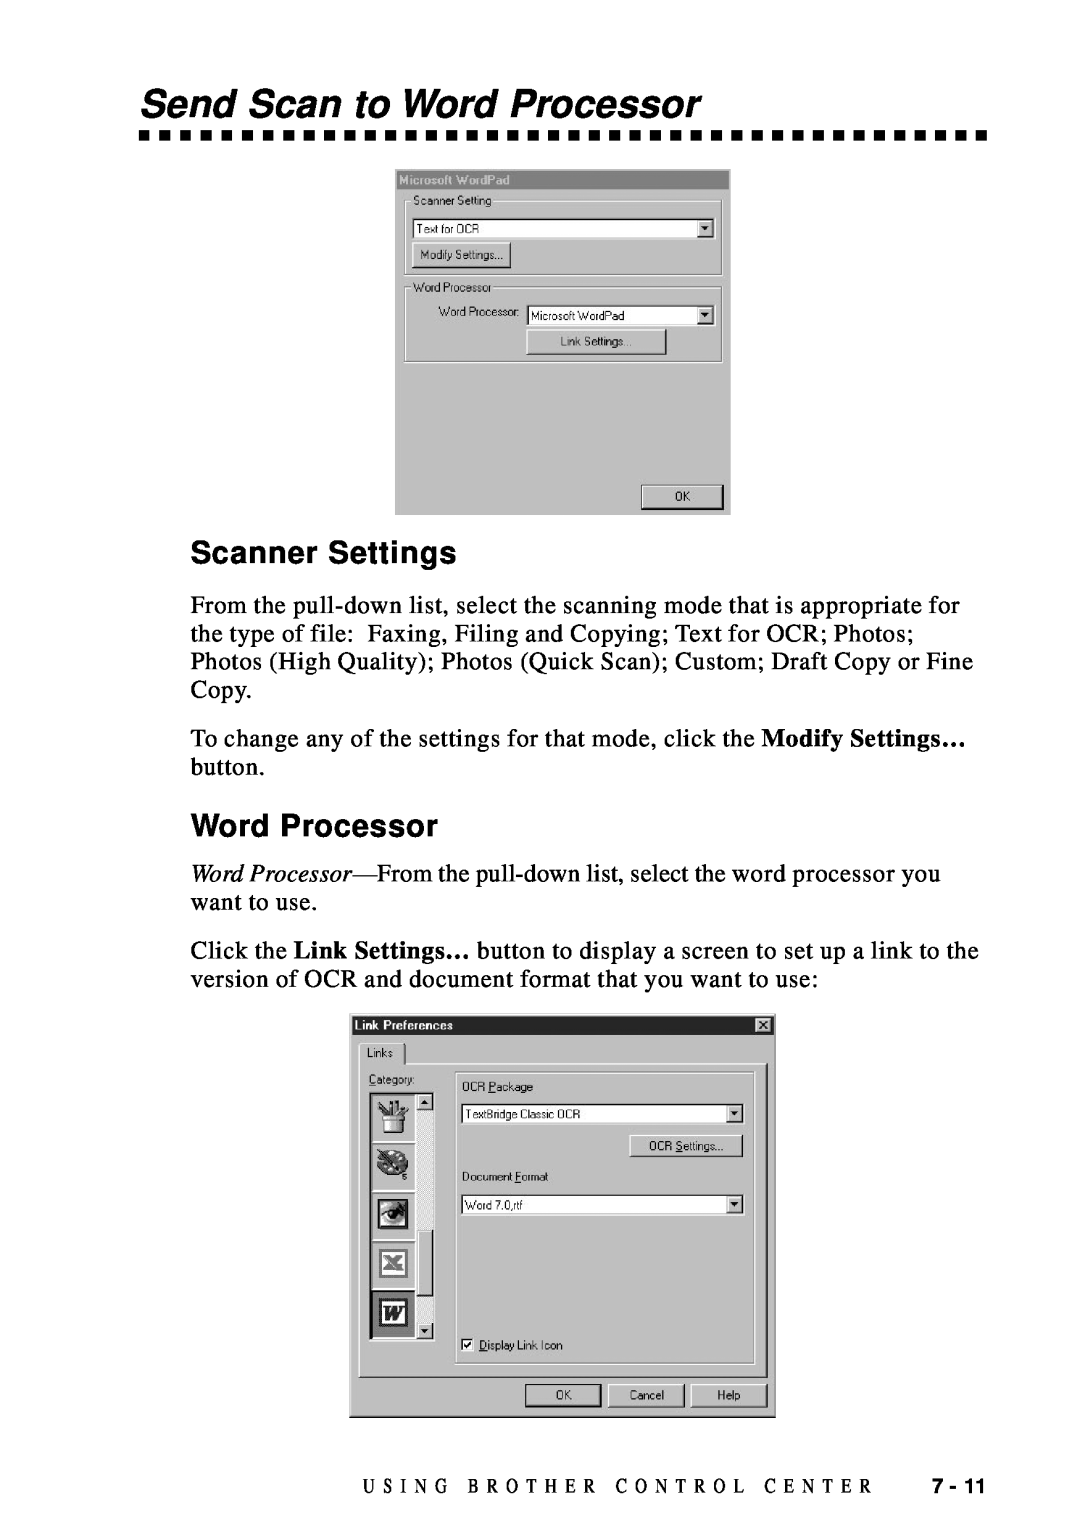 Brother DCP1200 manual Send Scan to Word Processor, Scanner Settings 